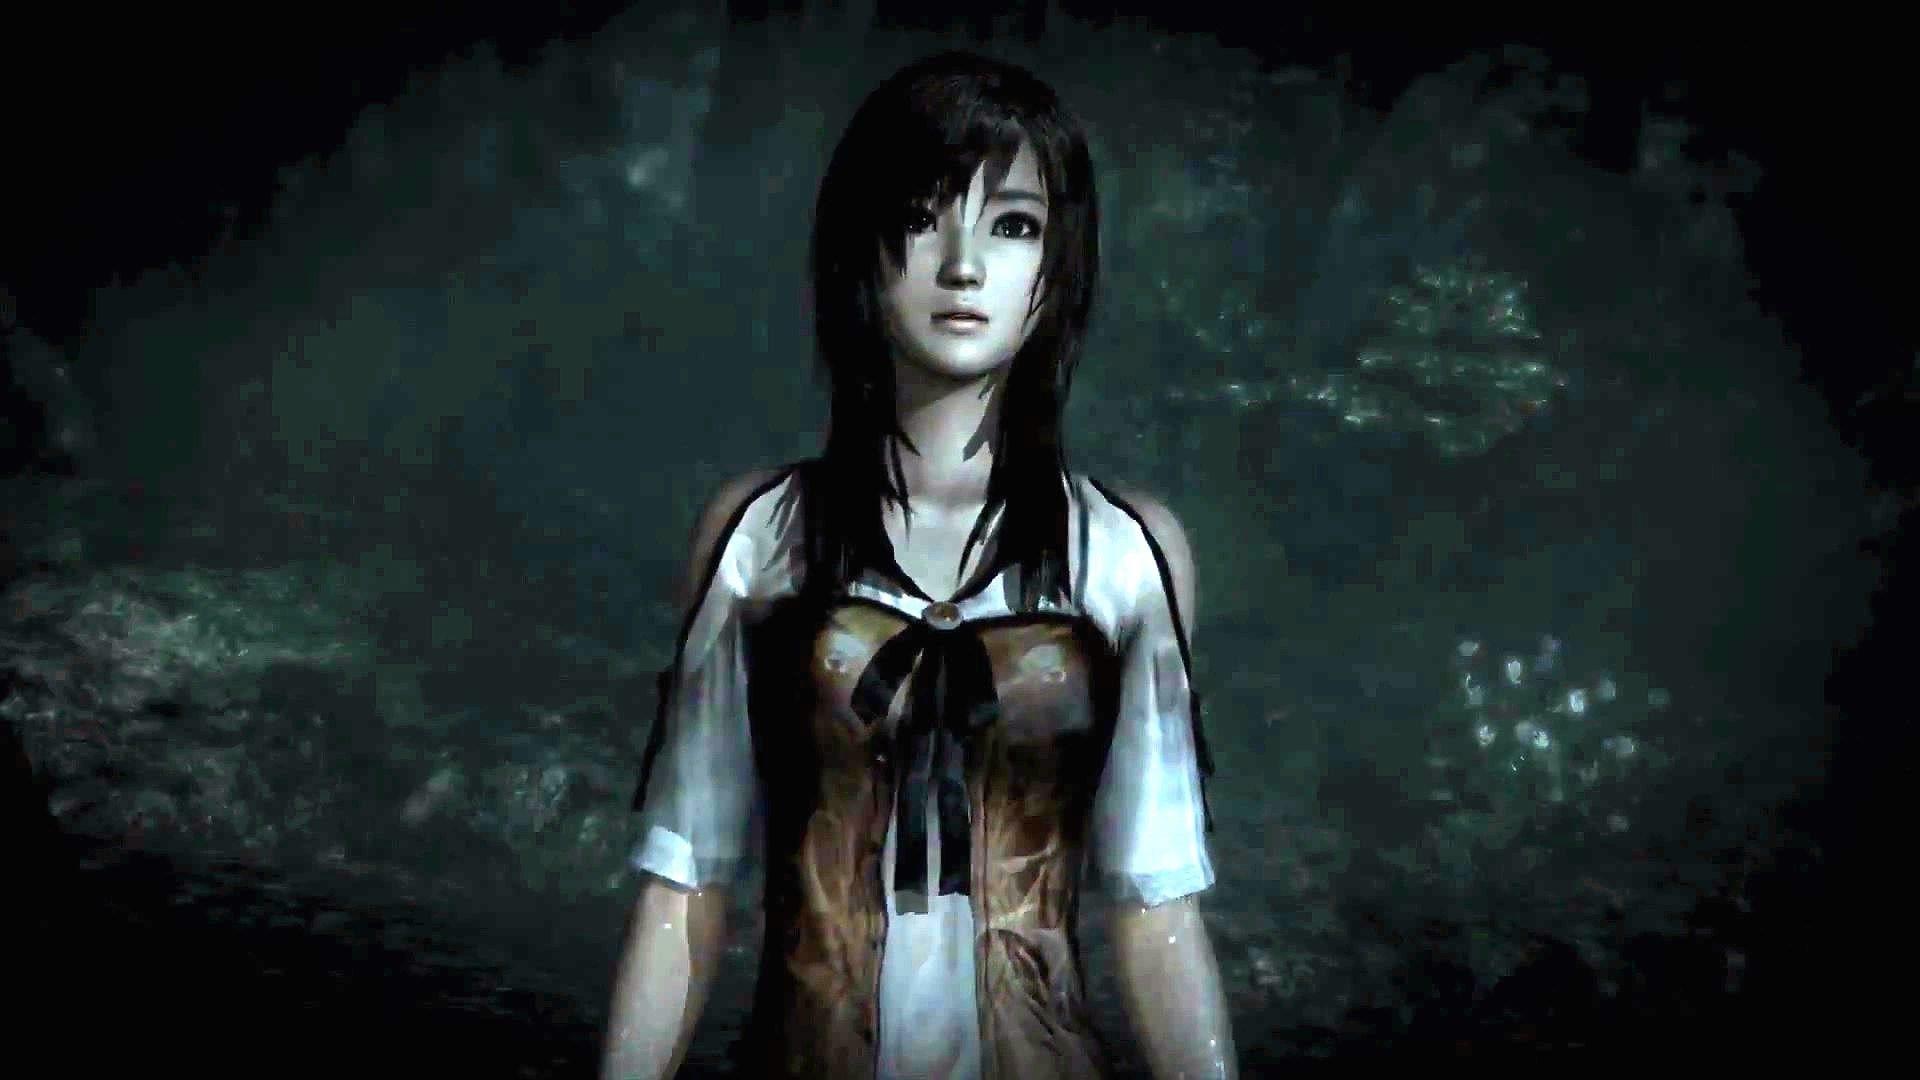 Fatal Frame 5 Wallpapers - Wallpaper Cave.